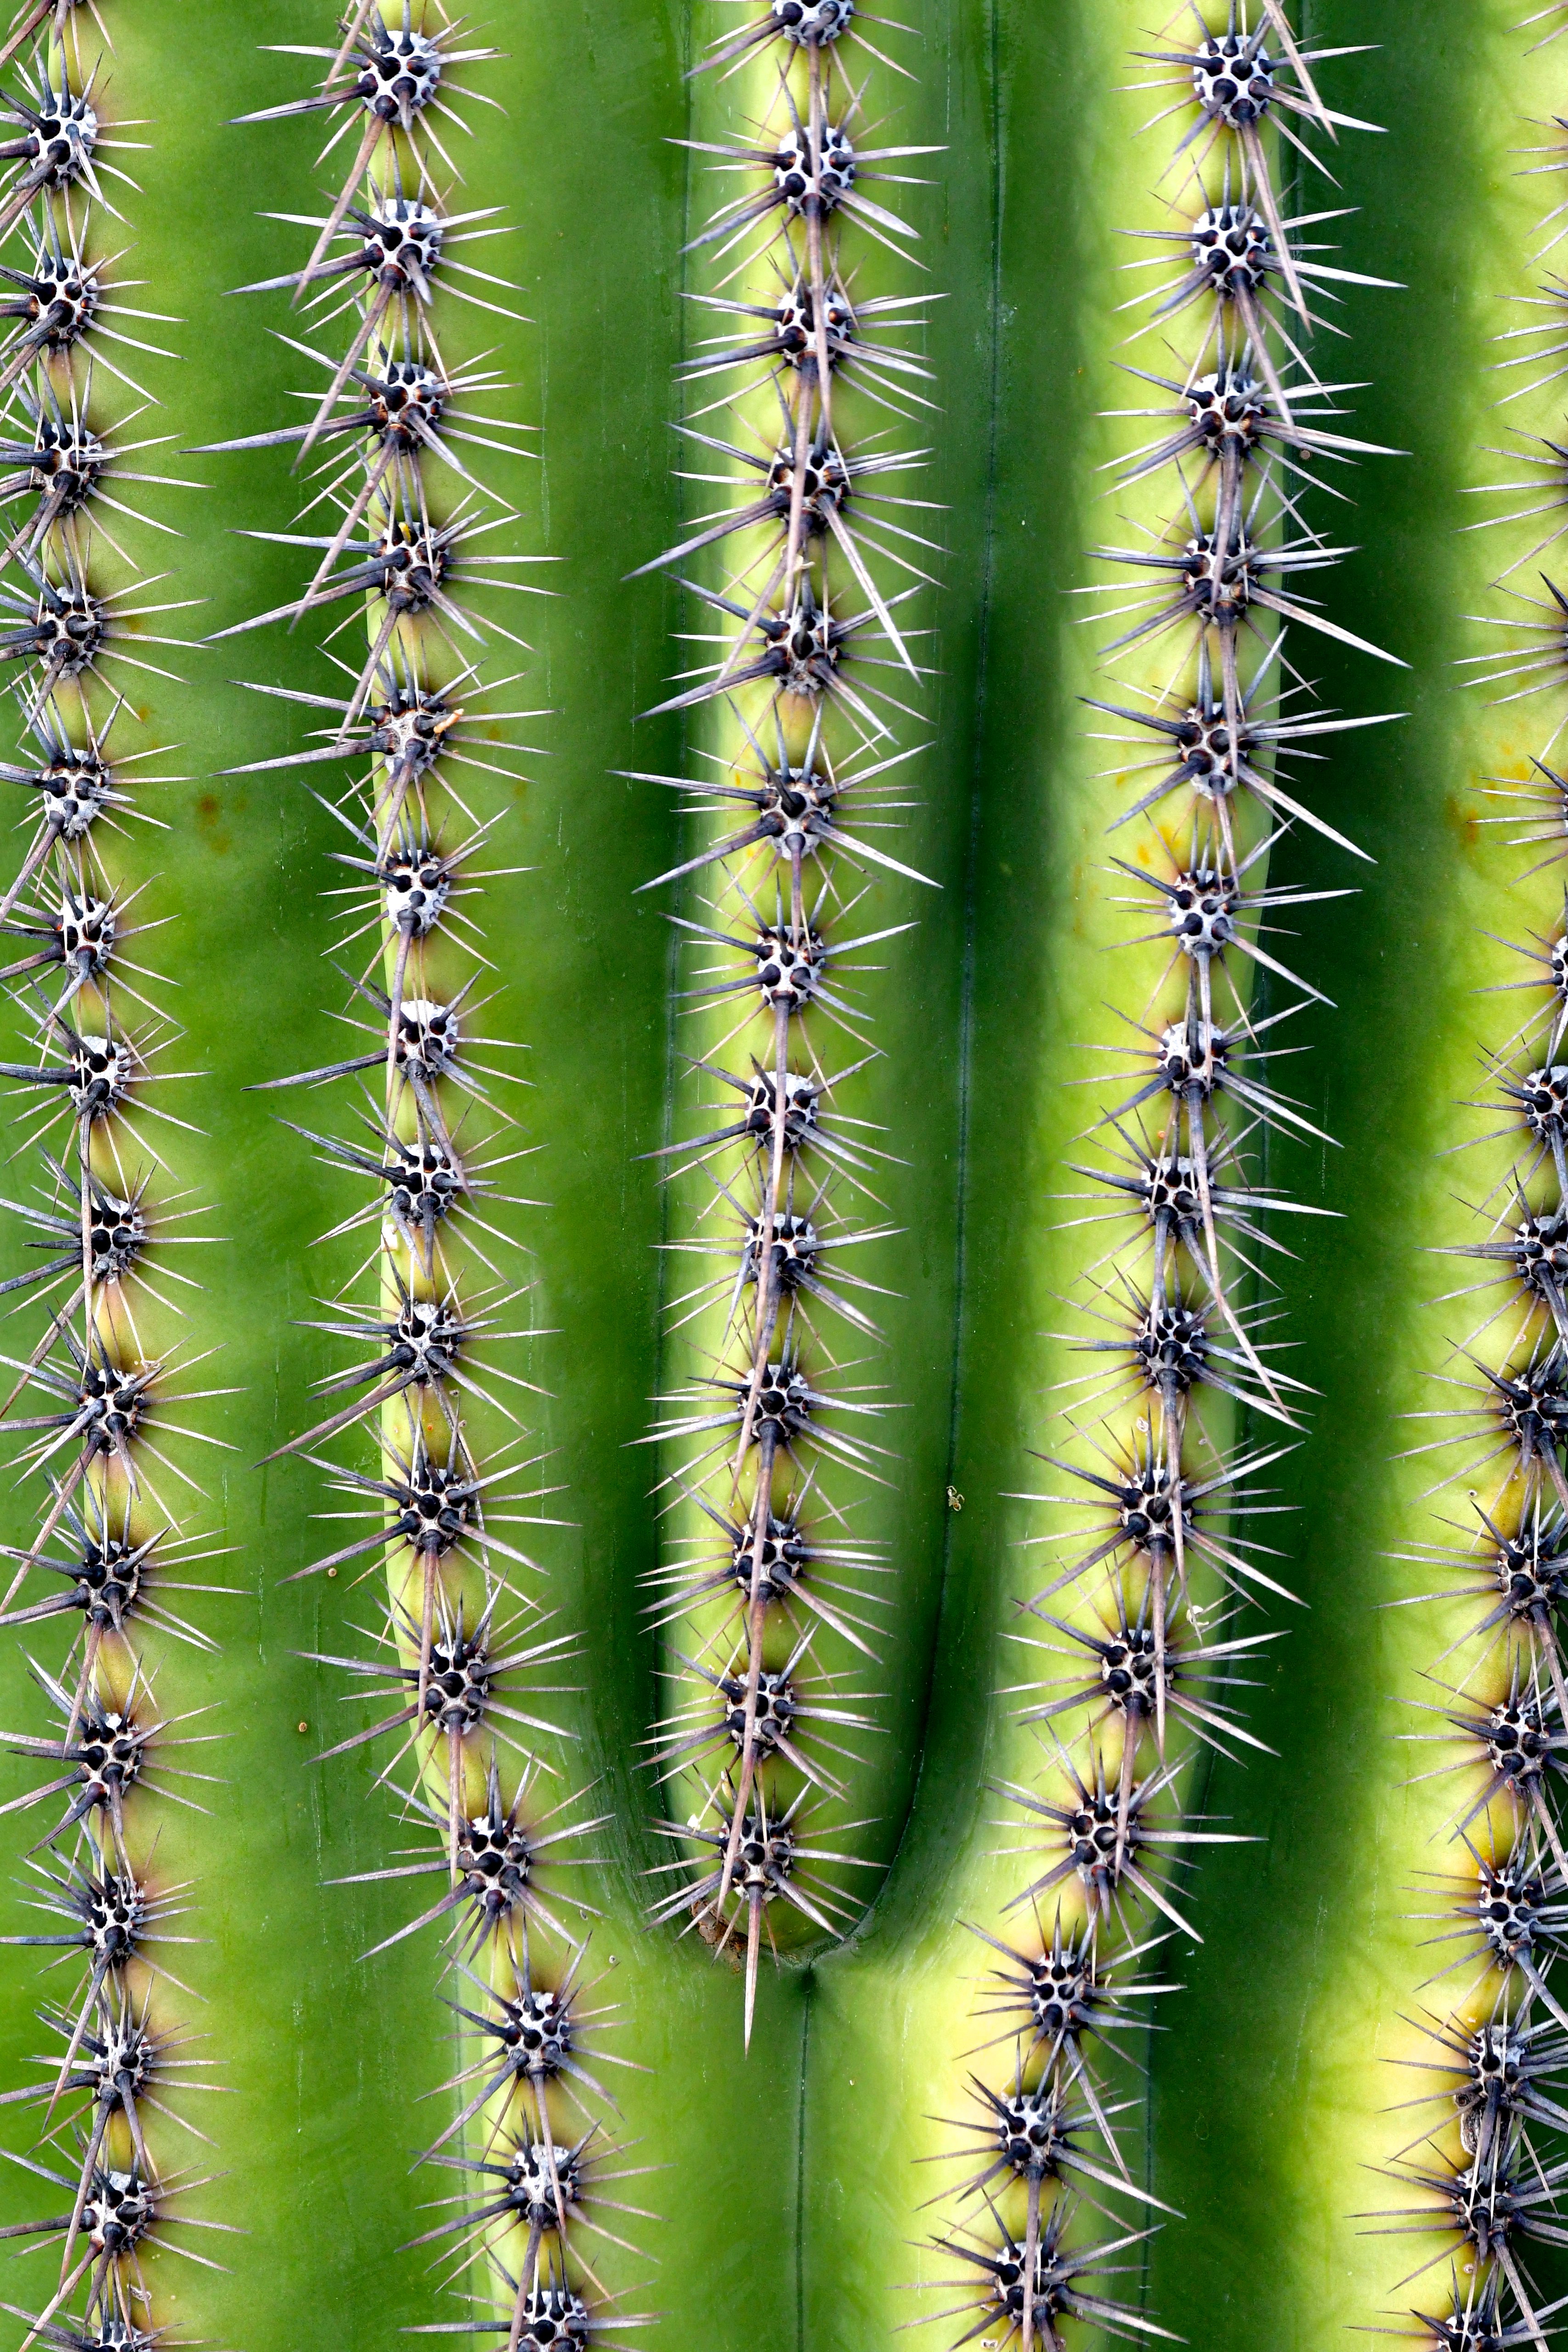 needle, green, plant, macro, cactus, thorns, prickles High Definition image